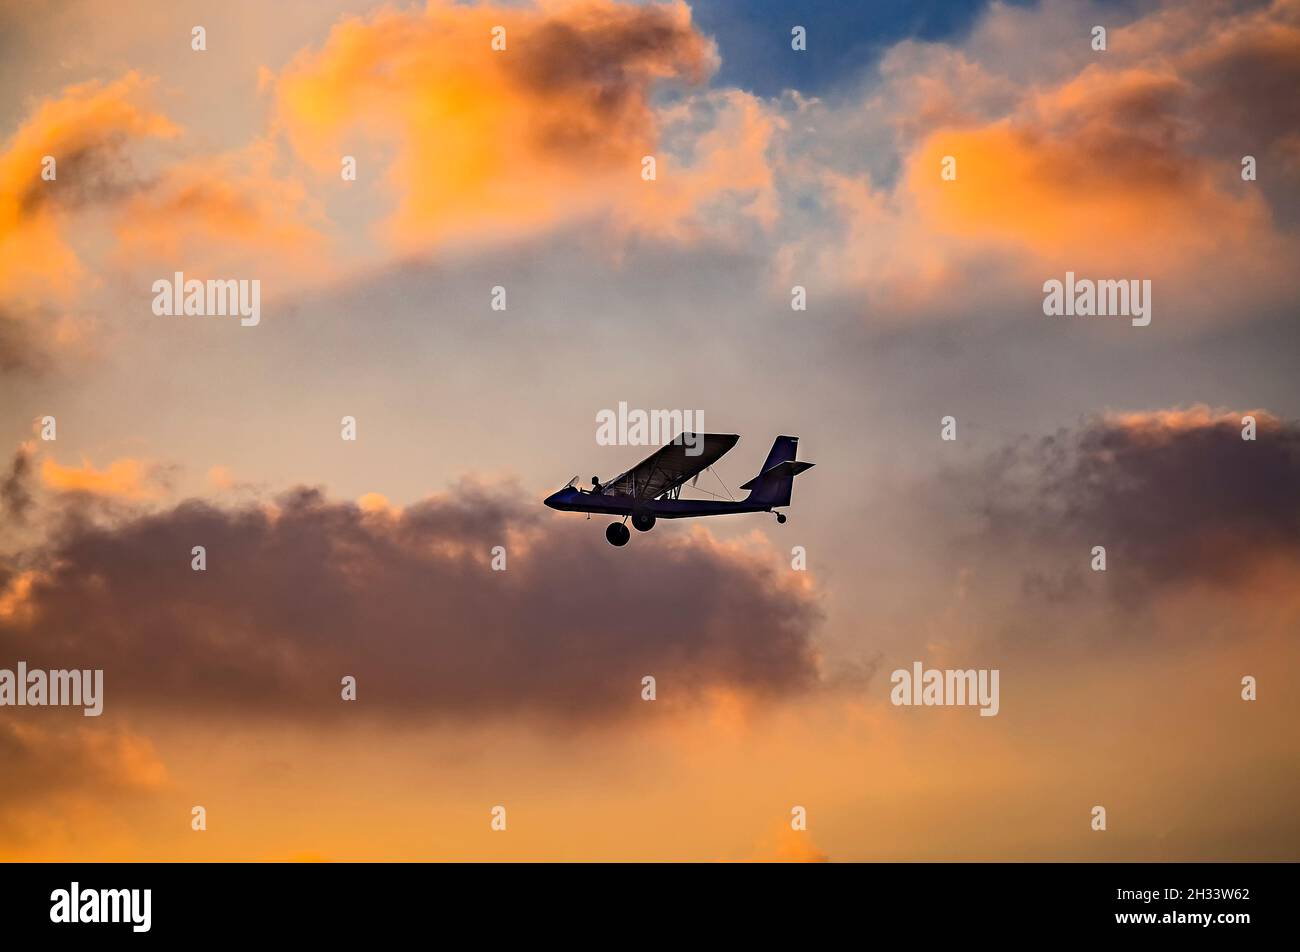 silhouette of ultralight microlite aircraft flying with a pilot and a passenger against sunset sky. Stock Photo